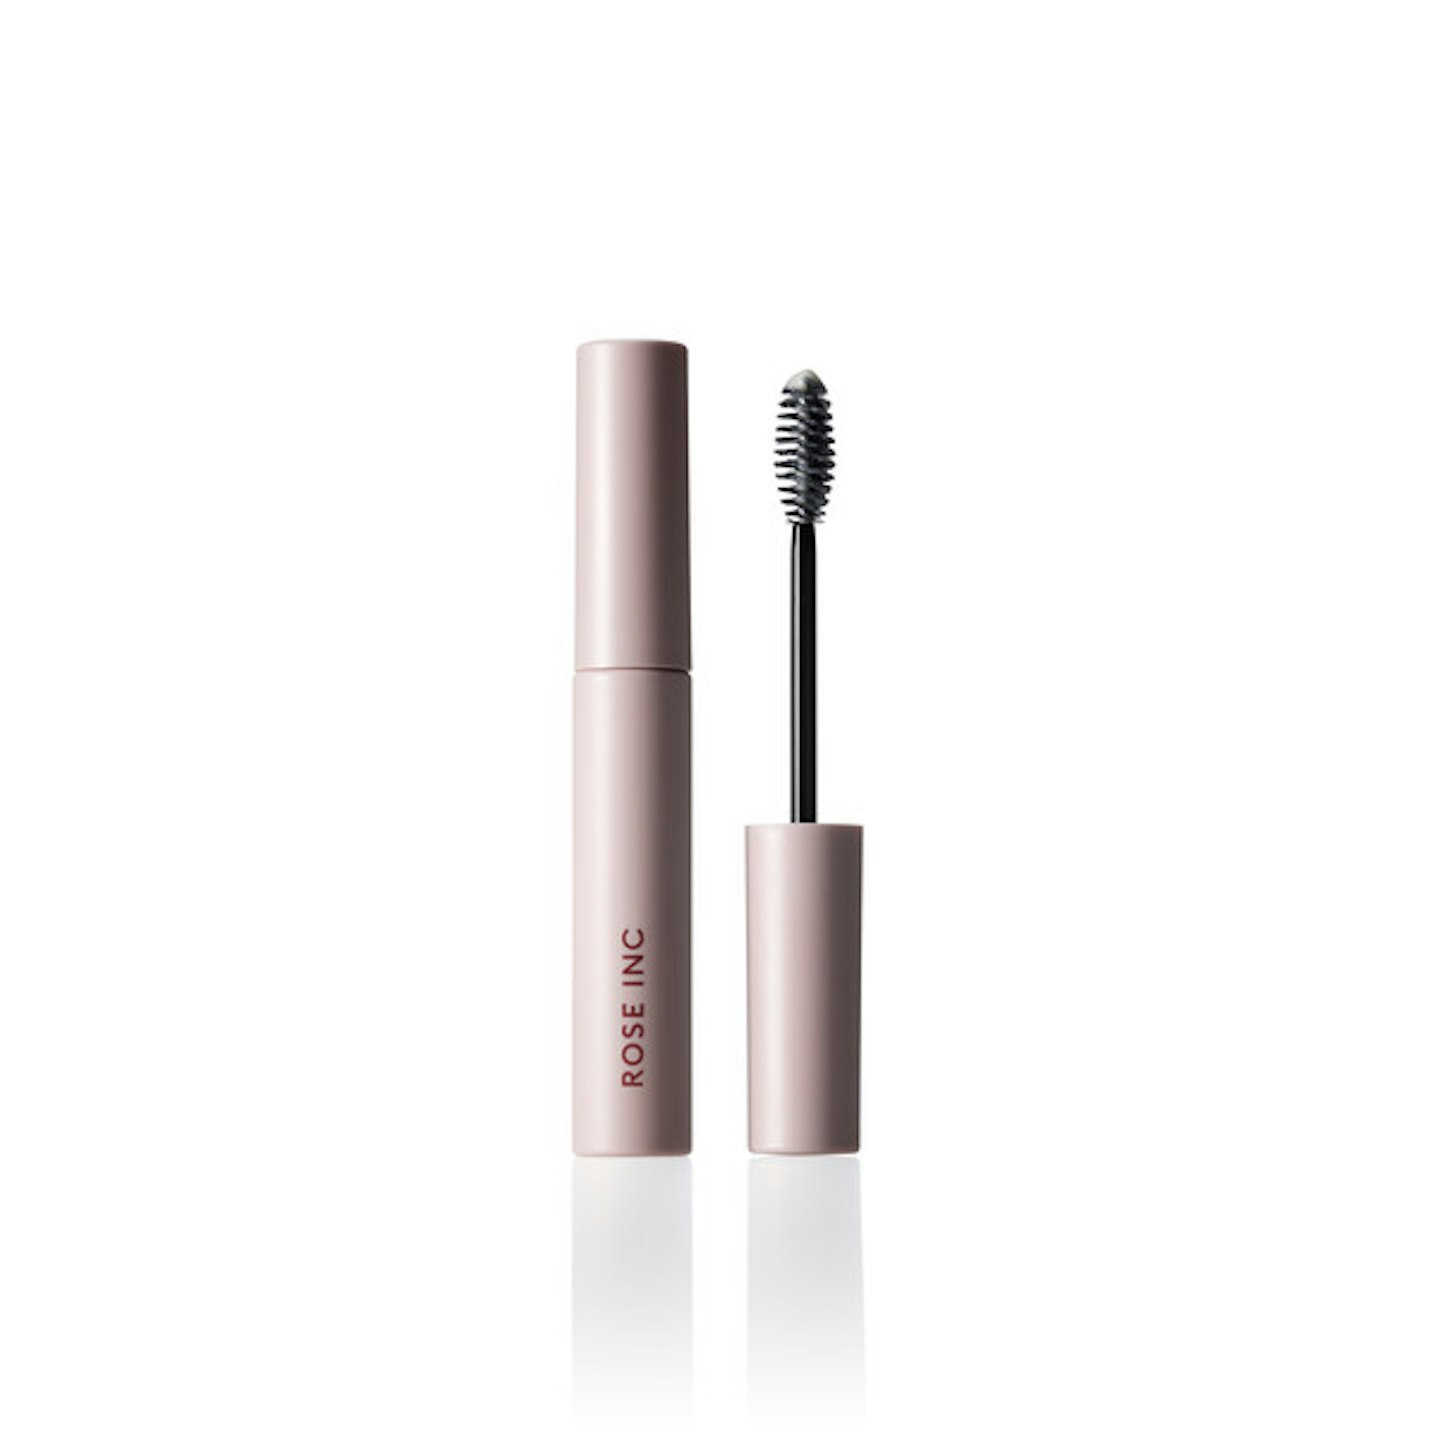 Rose Inc Brow Renew Enriched Clear Shaping Gel